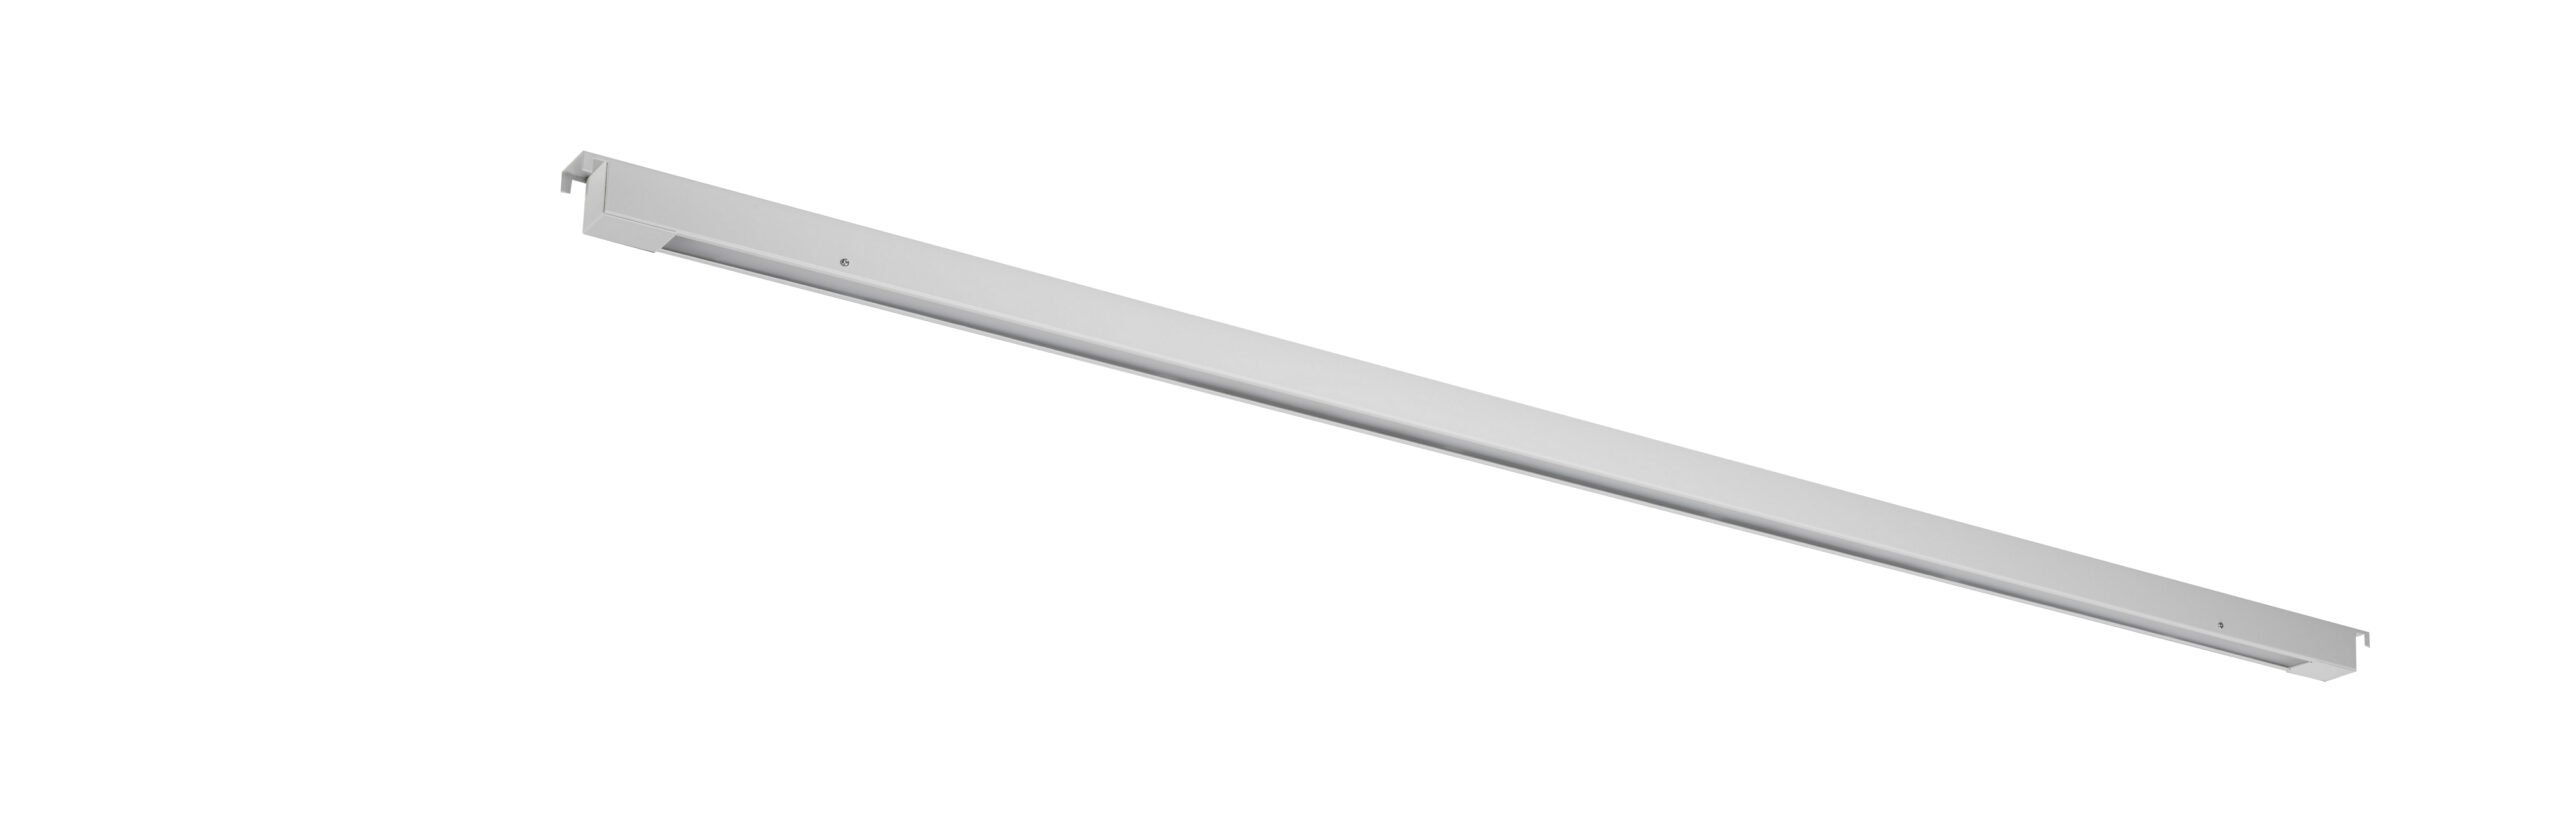 Linear LED lighting for retail businesses and grocers.